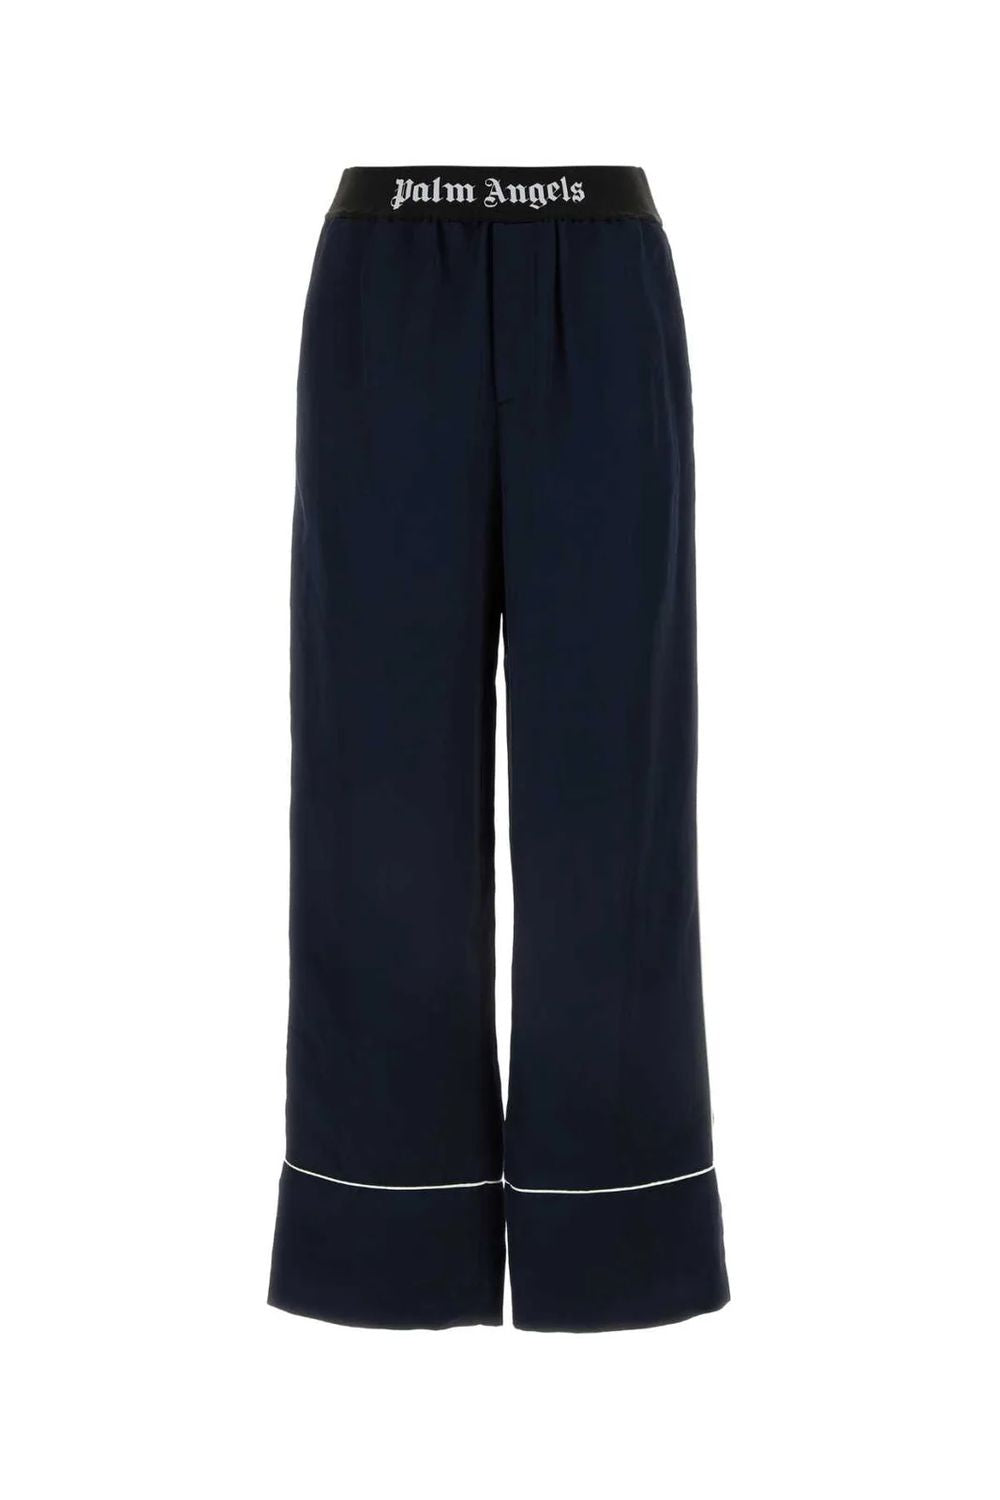 PALM ANGELS Luxurious Blue Satin Pajama Pants for Women